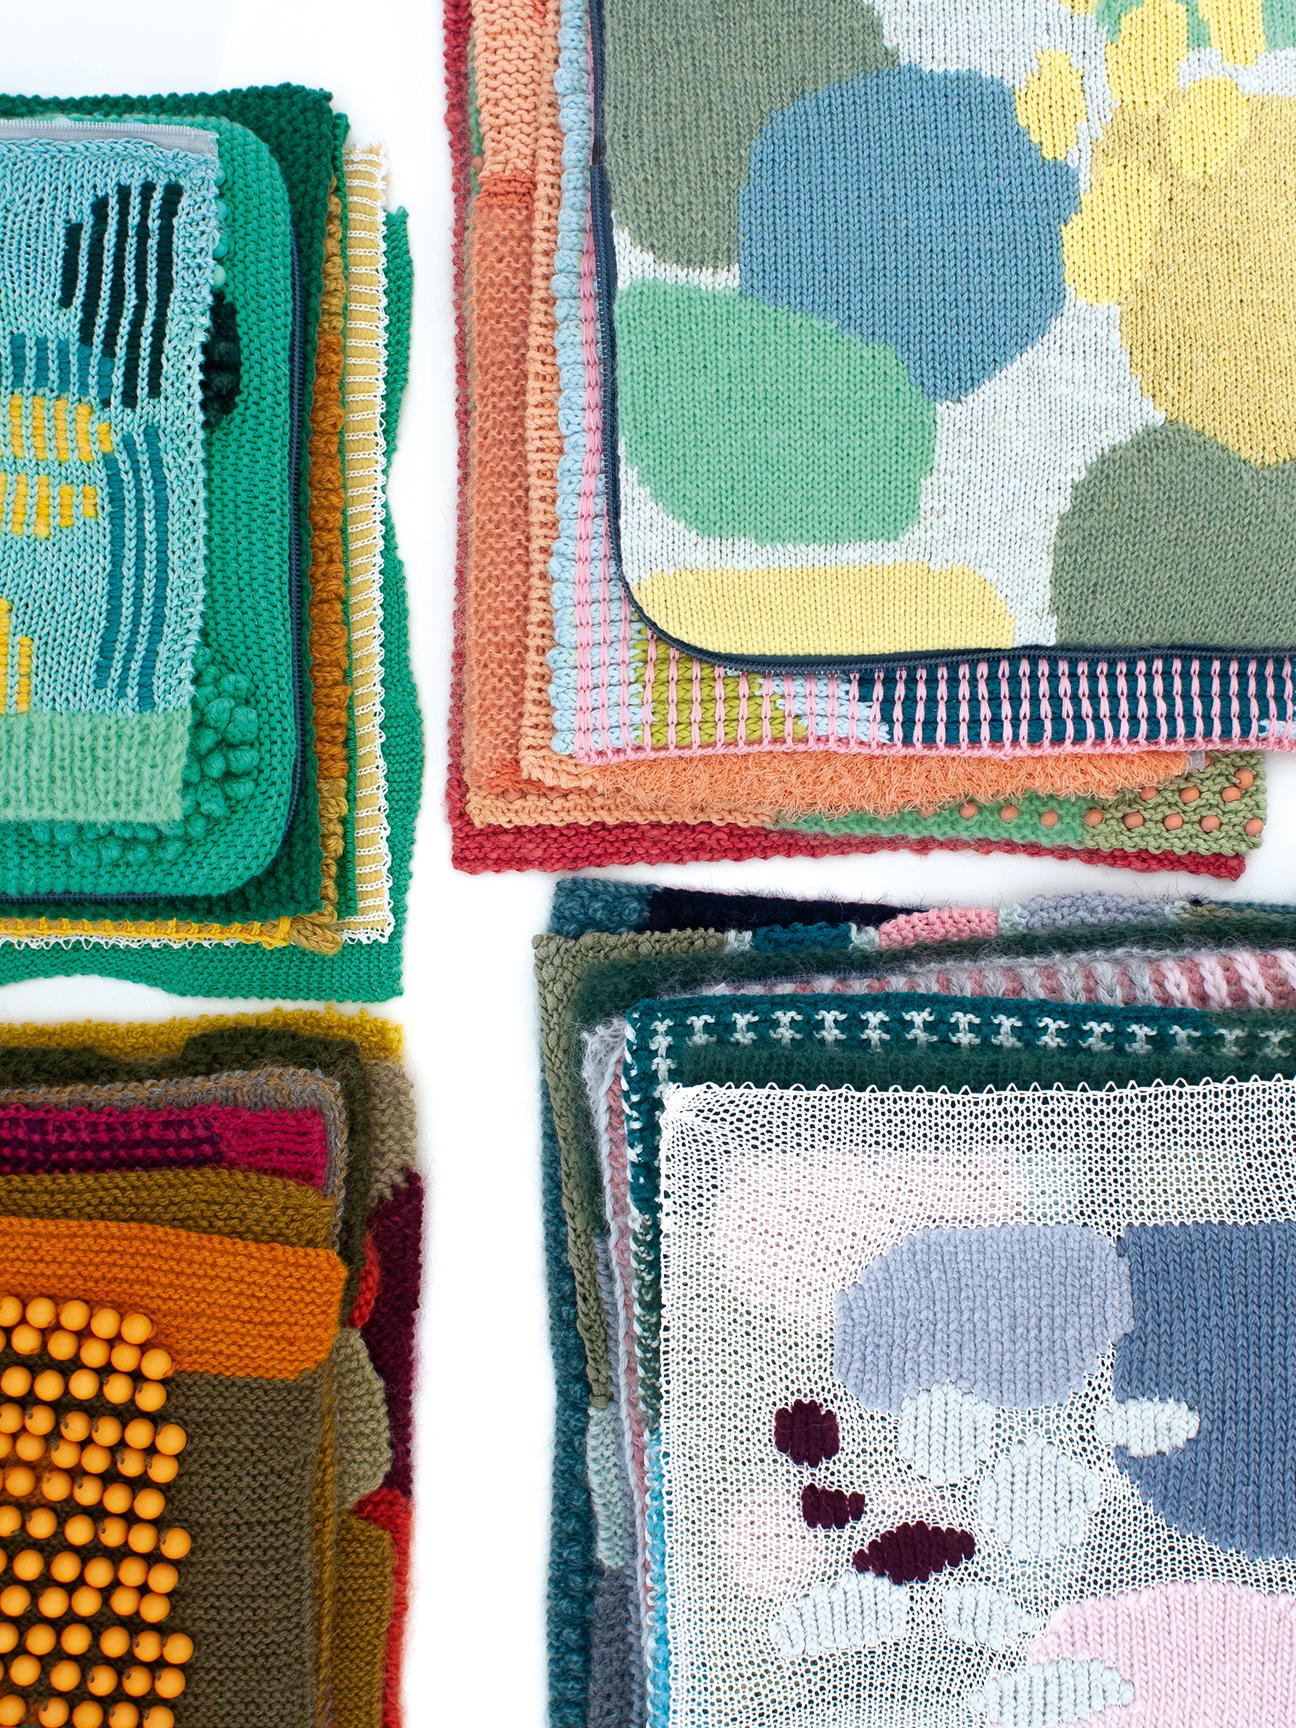 Colorful mixed knitted samples in varied patterns